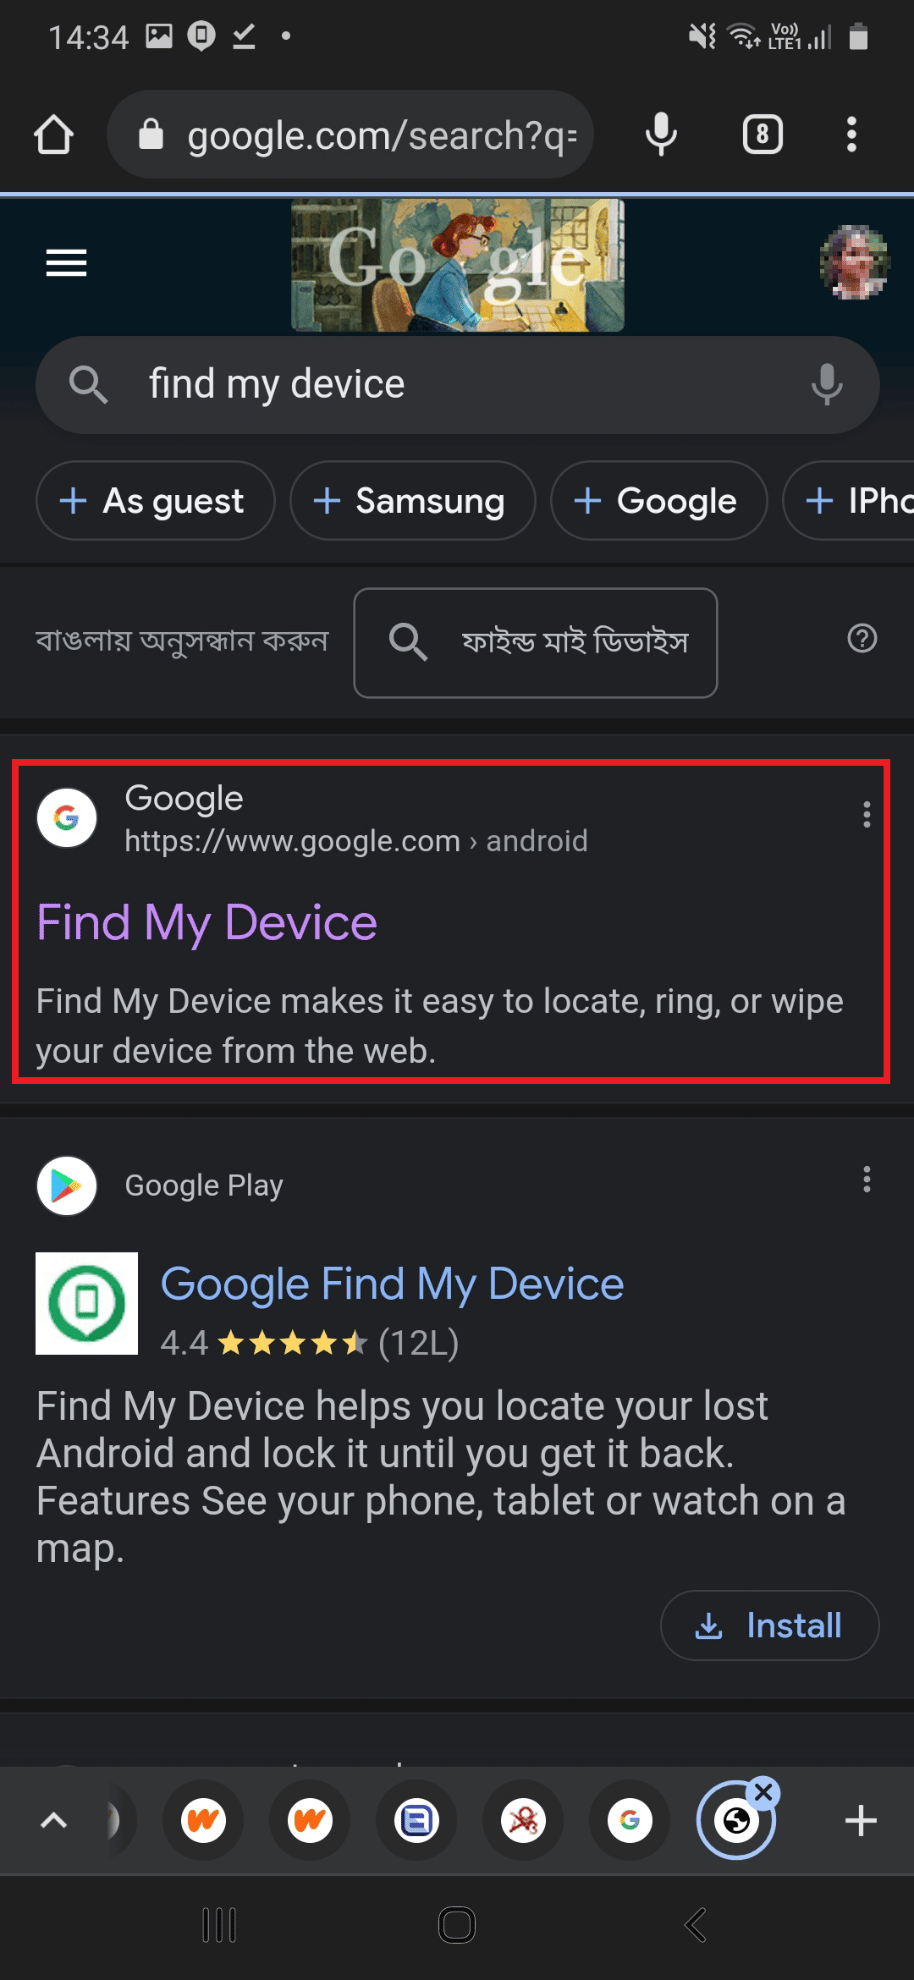 search for Find My Device